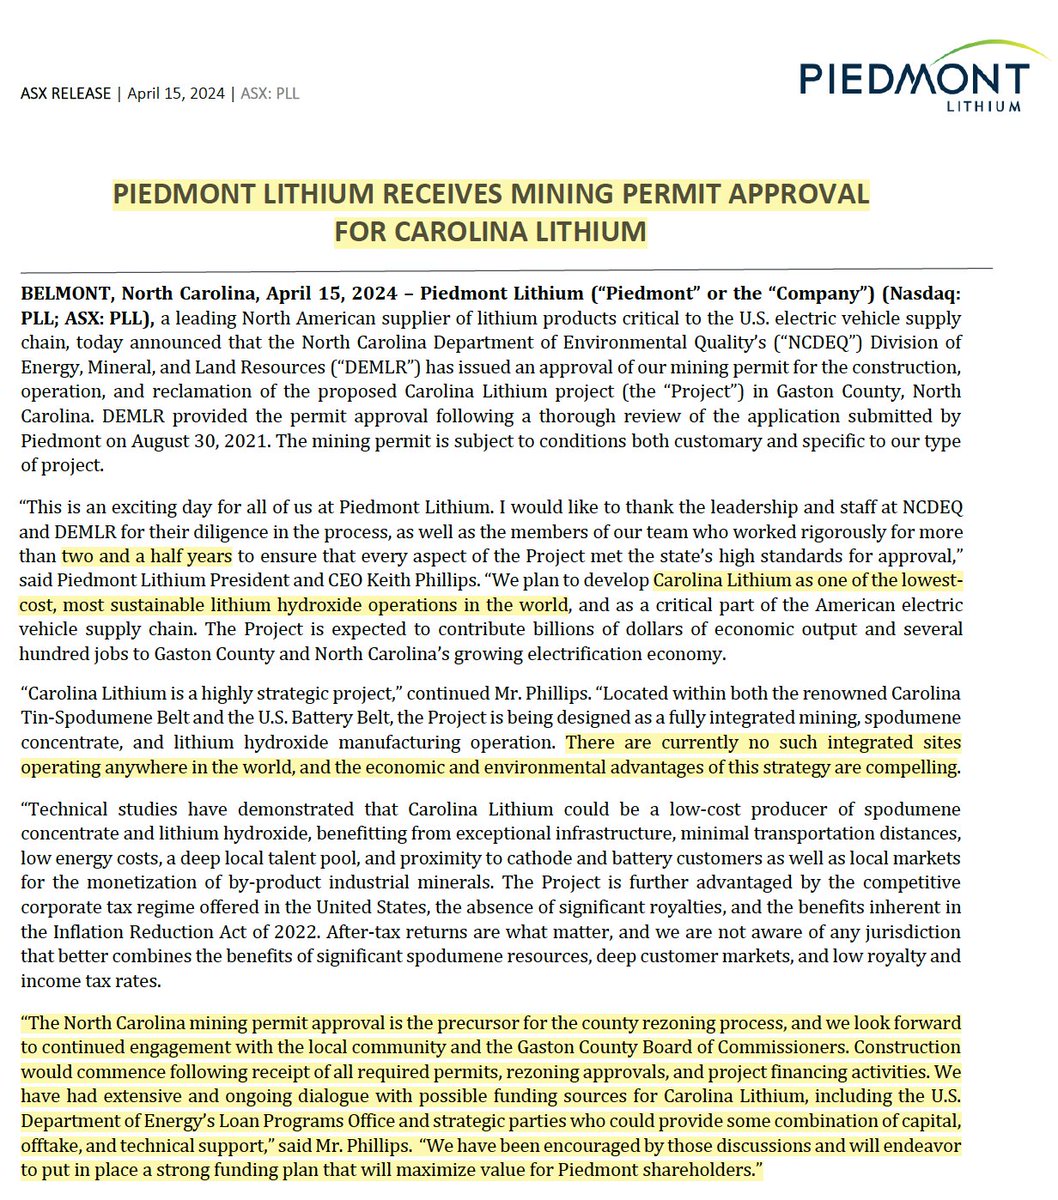 HUGE NEWS @PiedmontLithium #CarolinaLithium permit... From 2016 to 2021 this project alone helped $PLL reach🦄 valuation & attracted $TSLA at Battery Day as the poster child for a localized, conventional, critical mineral supply chain... Since then, sell-side analysts & Mr.…